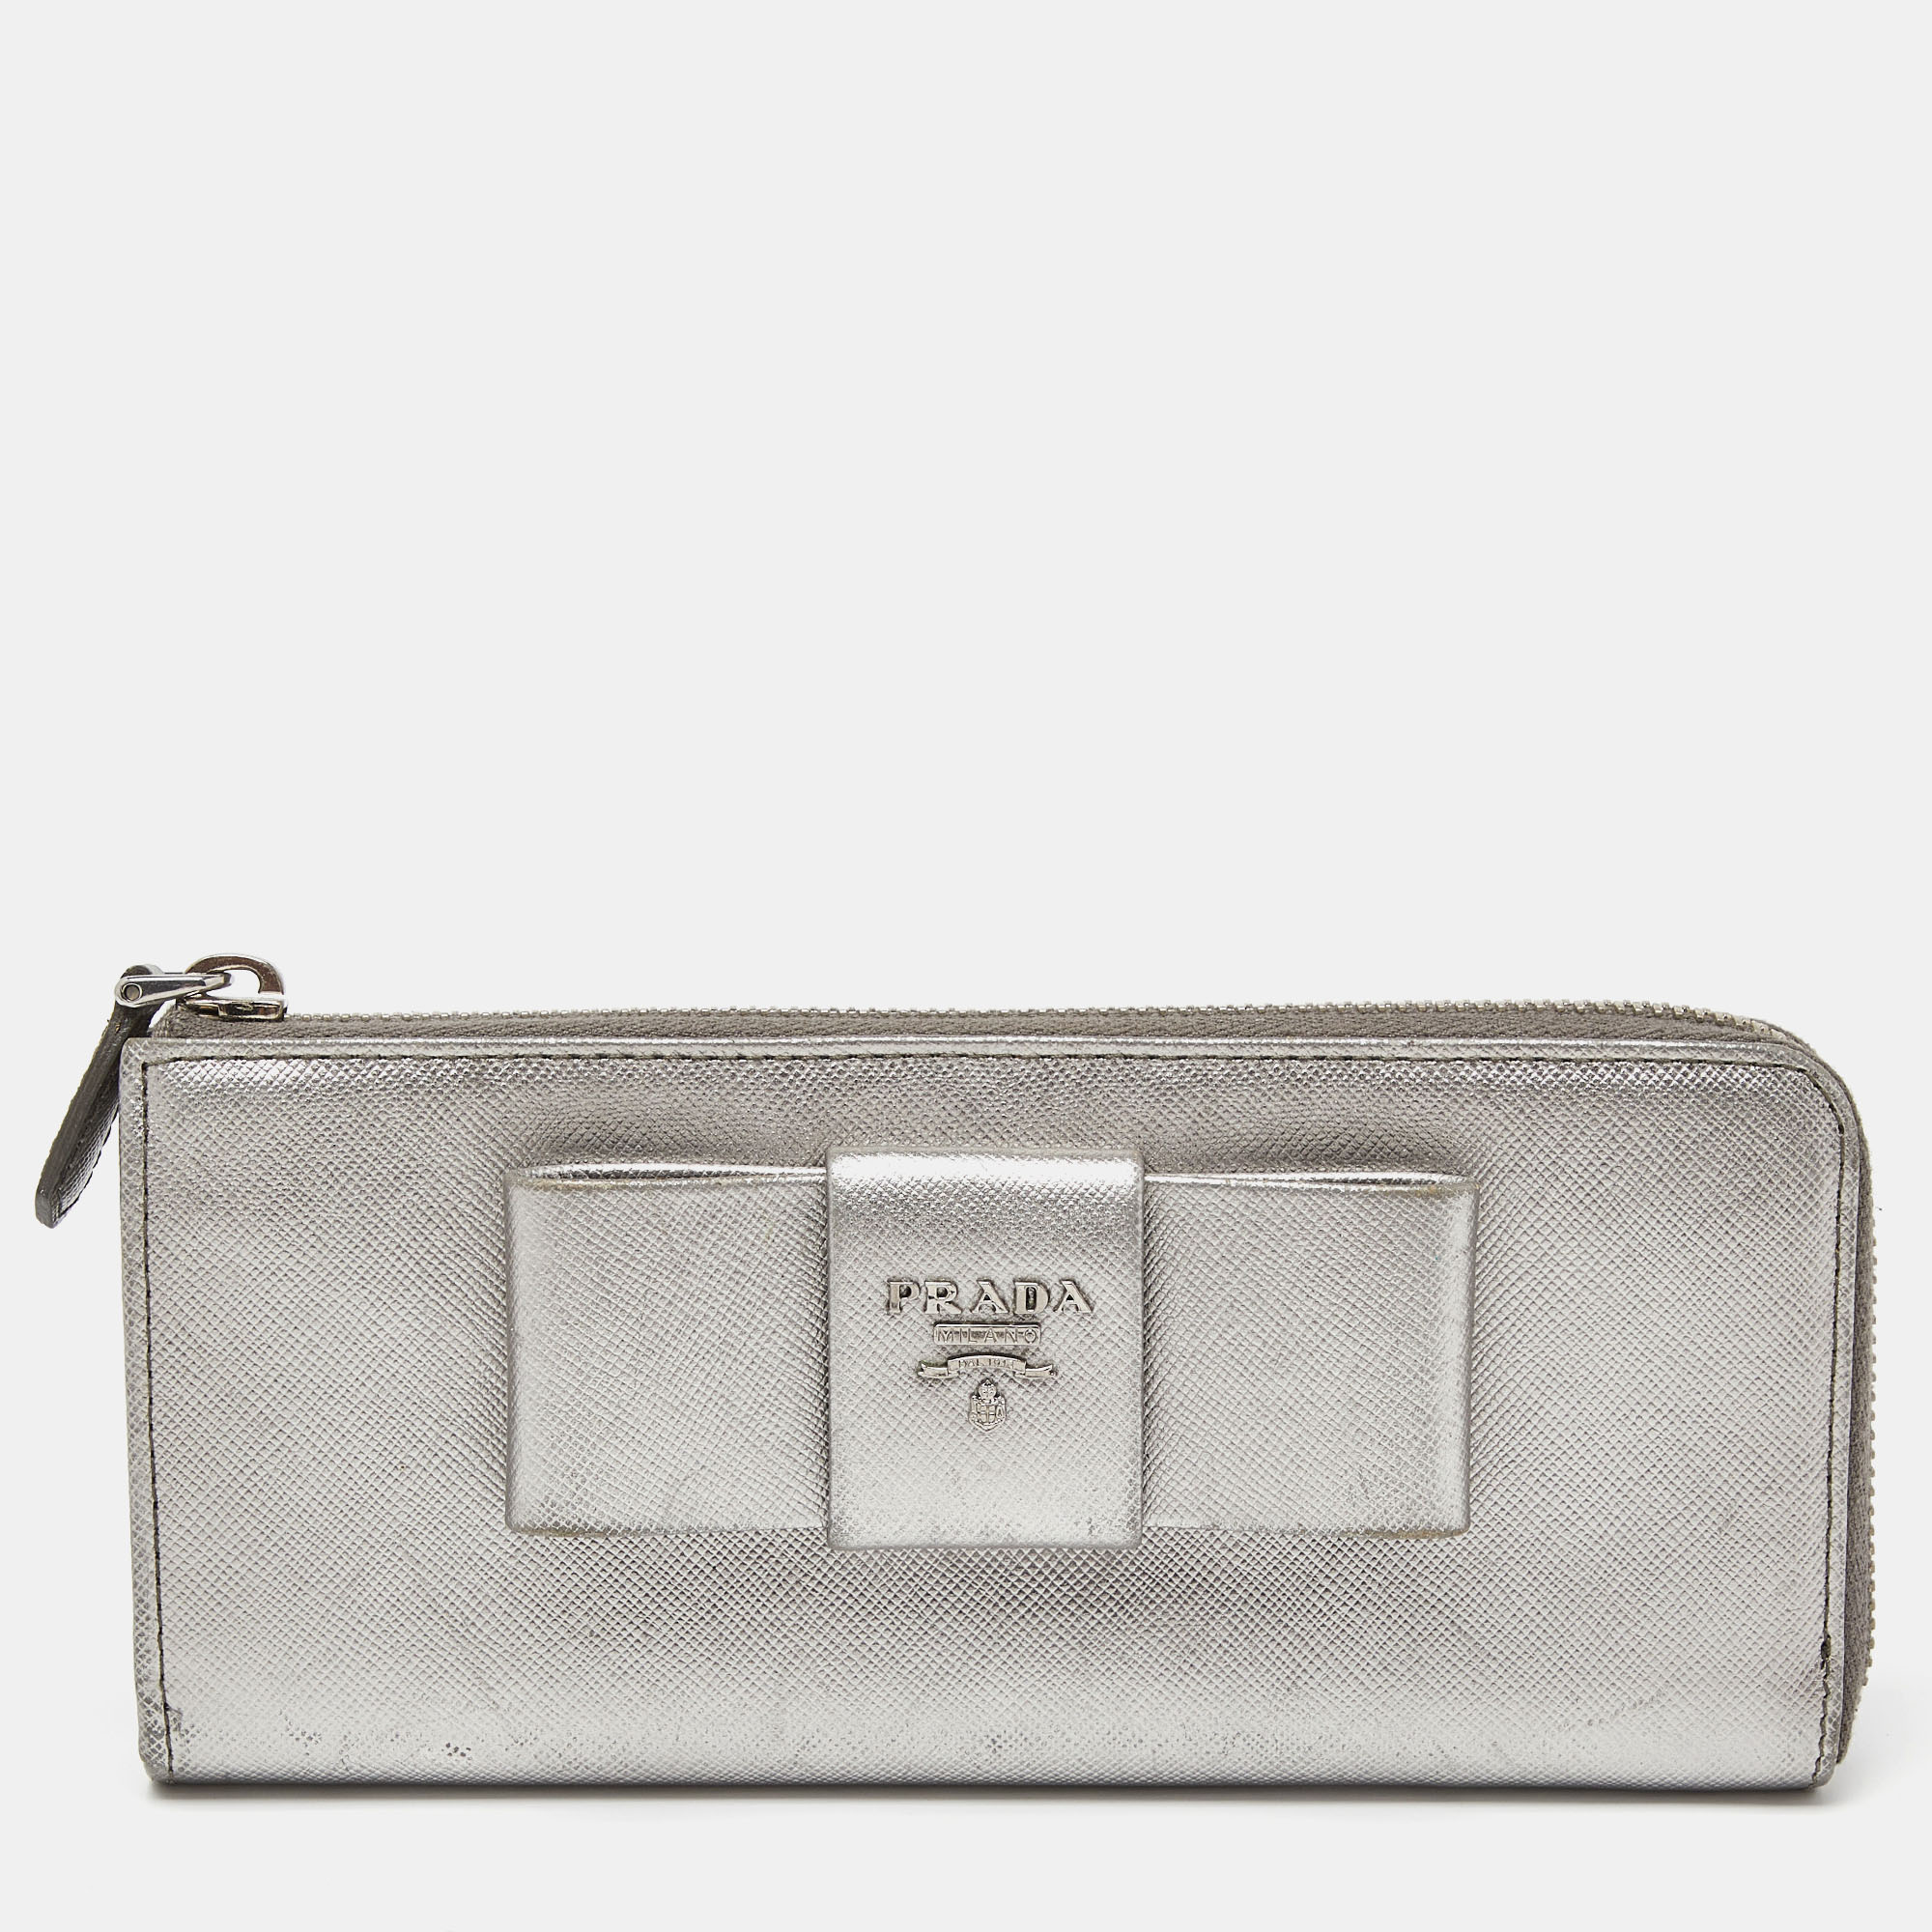 Pre-owned Prada Silver Saffiano Lux Leather Zip Around Wallet